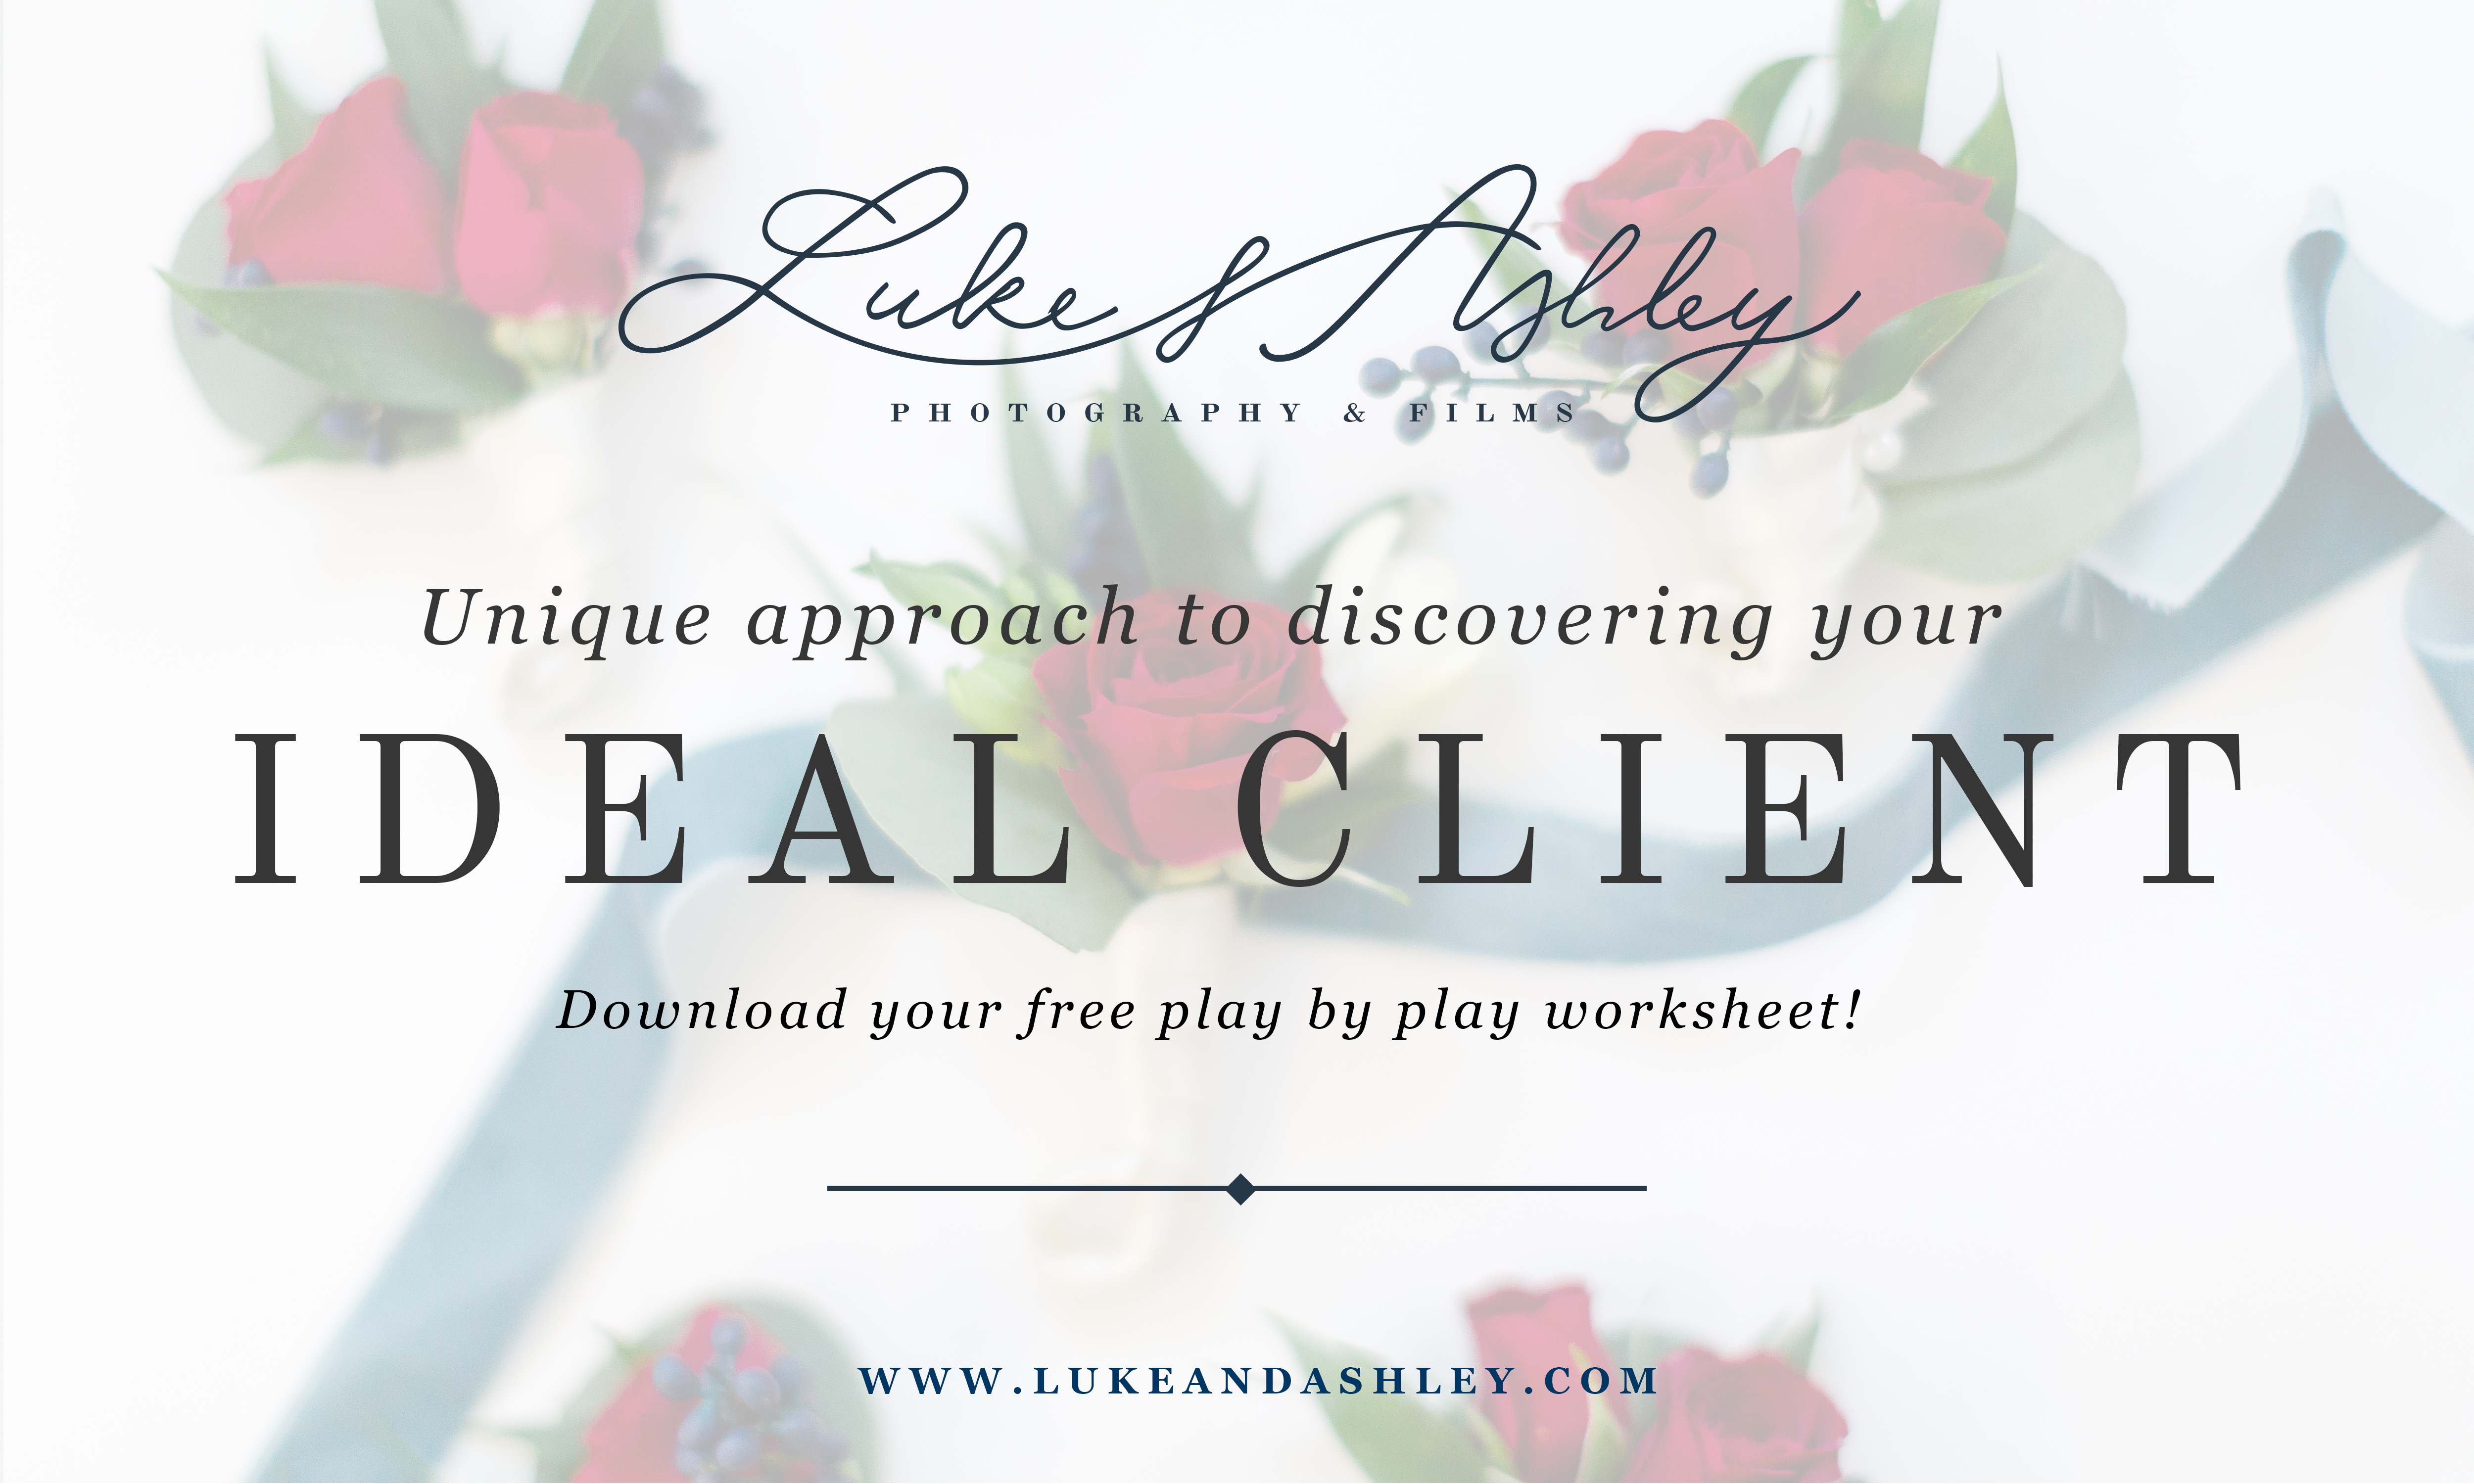 ideal customer profile guide by Luke and Ashley photography